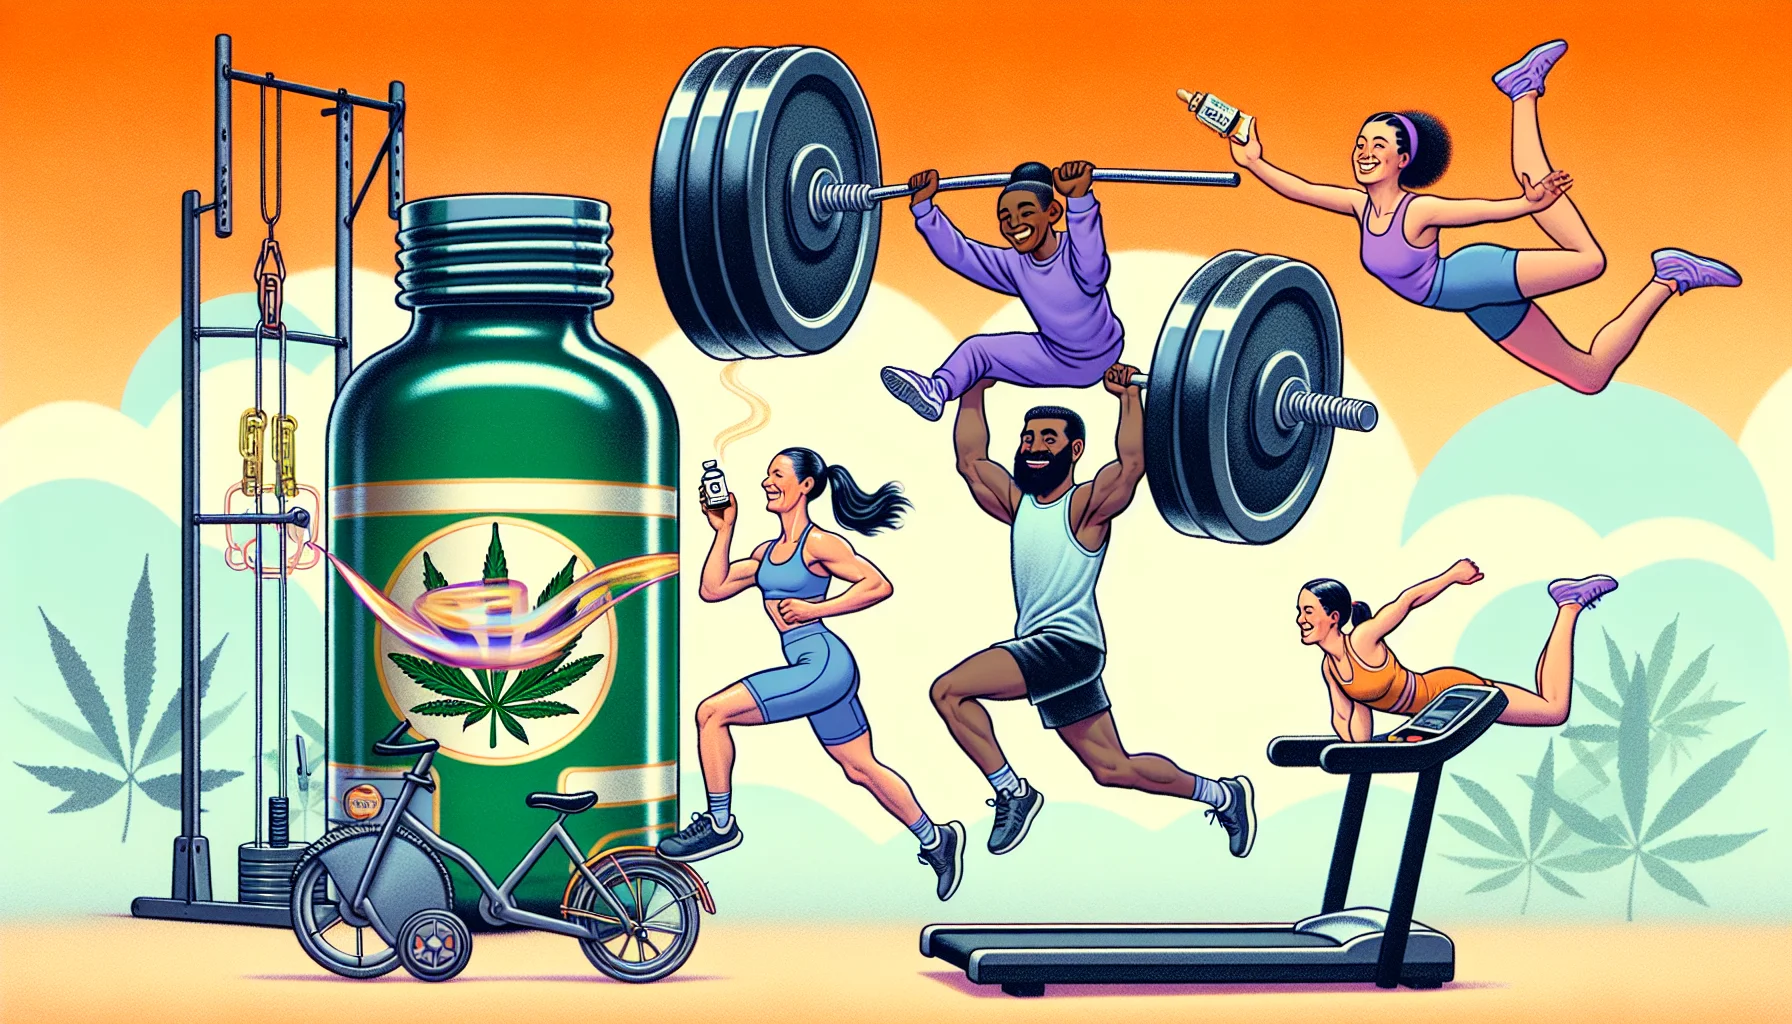 Picture a humorously exaggerated gym scene with fitness enthusiasts of diverse races and genders. Imagine a Caucasian female weightlifter grinning as she effortlessly lifts hefty weights filled with CBD oil instead of metal plates. Adjacent to her, visualize a Black male gymnast performing a perfect handstand balance on a giant CBD oil bottle. On the sidelines, see a Hispanic woman happily jogging on a treadmill that speeds up every time she takes a dose of CBD from a mini dispenser attached to the machine. These unique scenarios highlight the positive impact of CBD on easing fitness-related discomforts in a funny, encouraging setting.